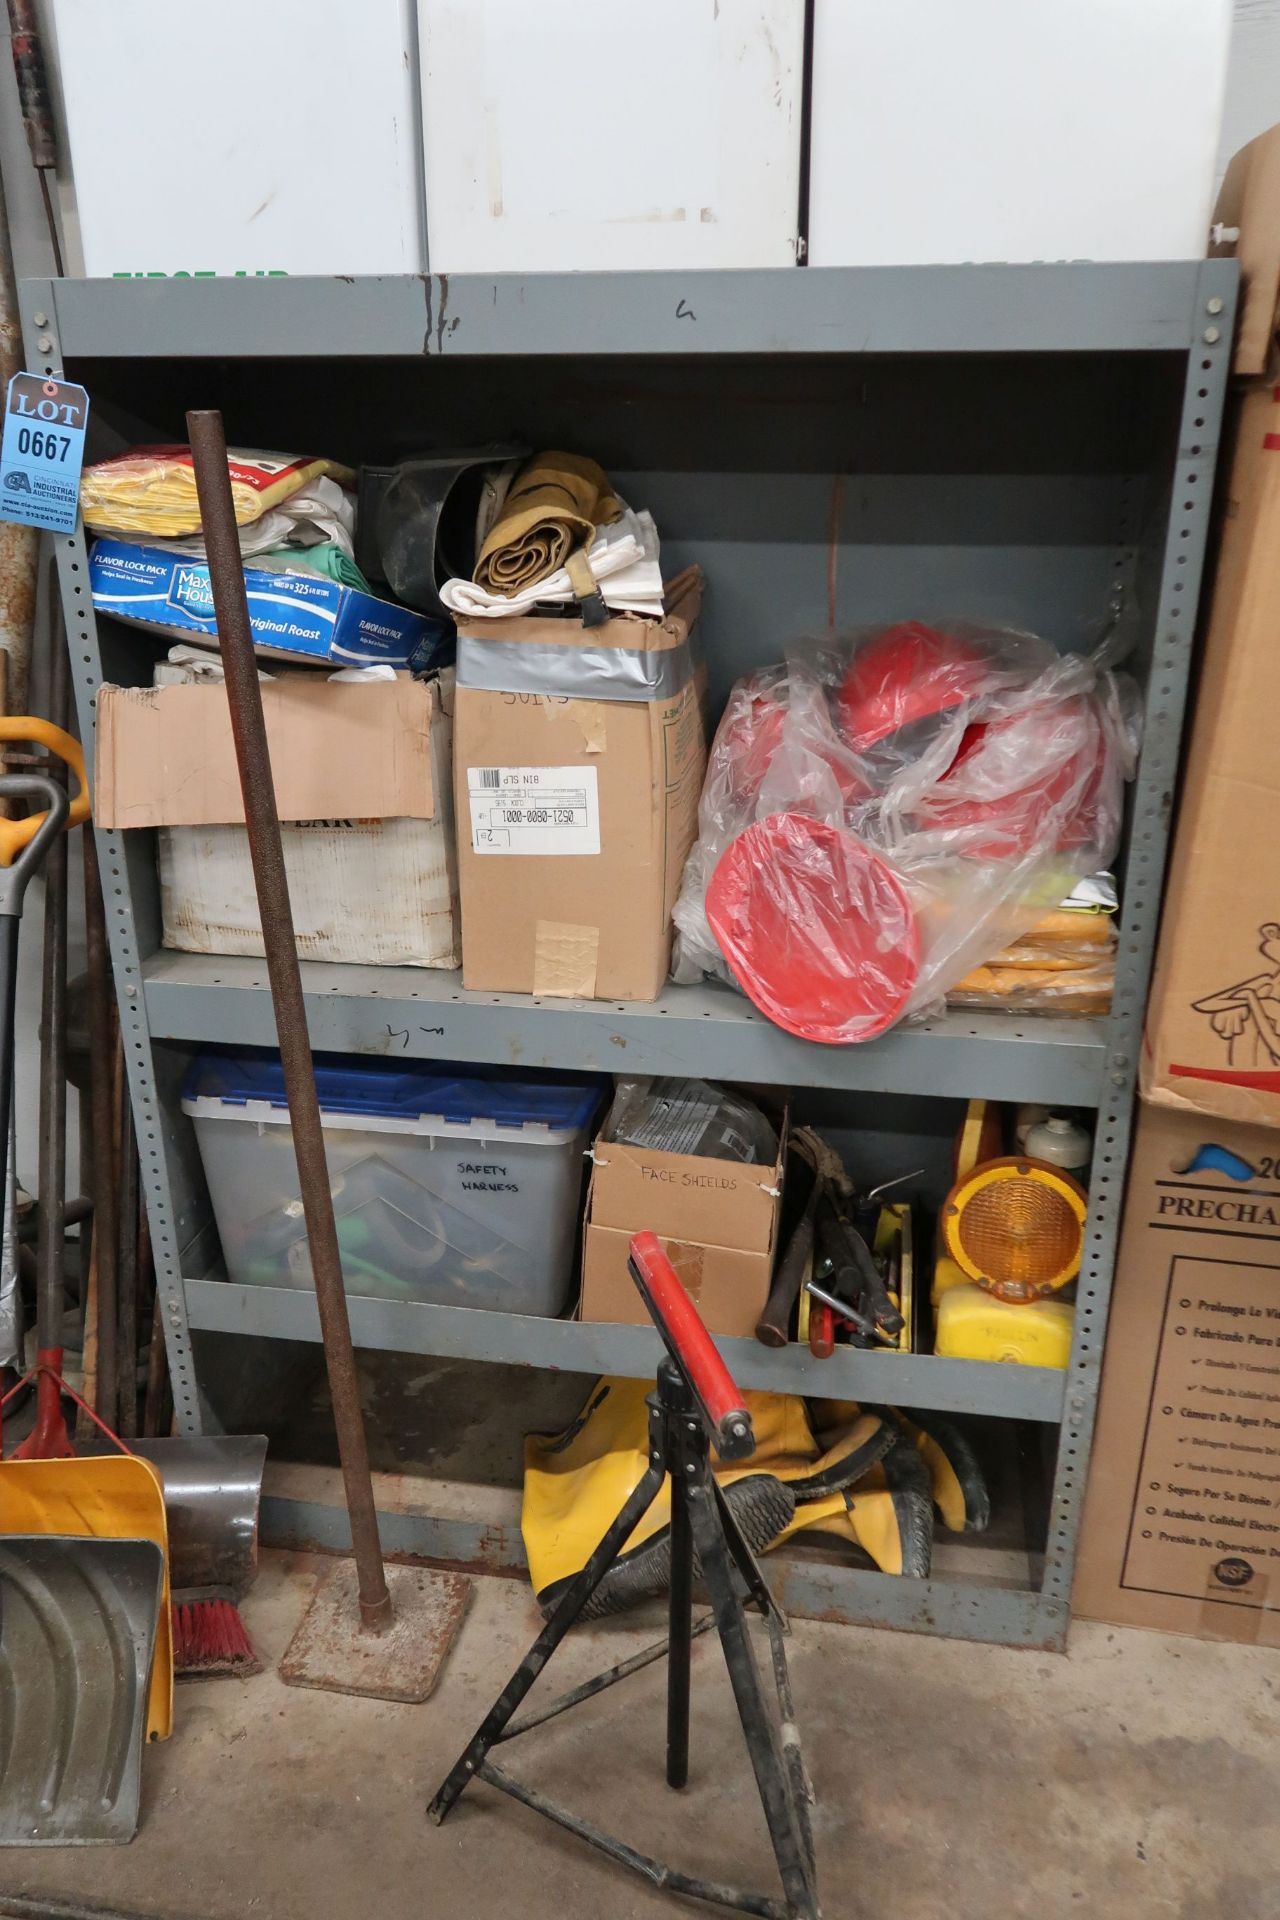 CONTENTS OF SHELF INCLUDING SAFETY EQUIPMENT AND FIRST AID CABINETS